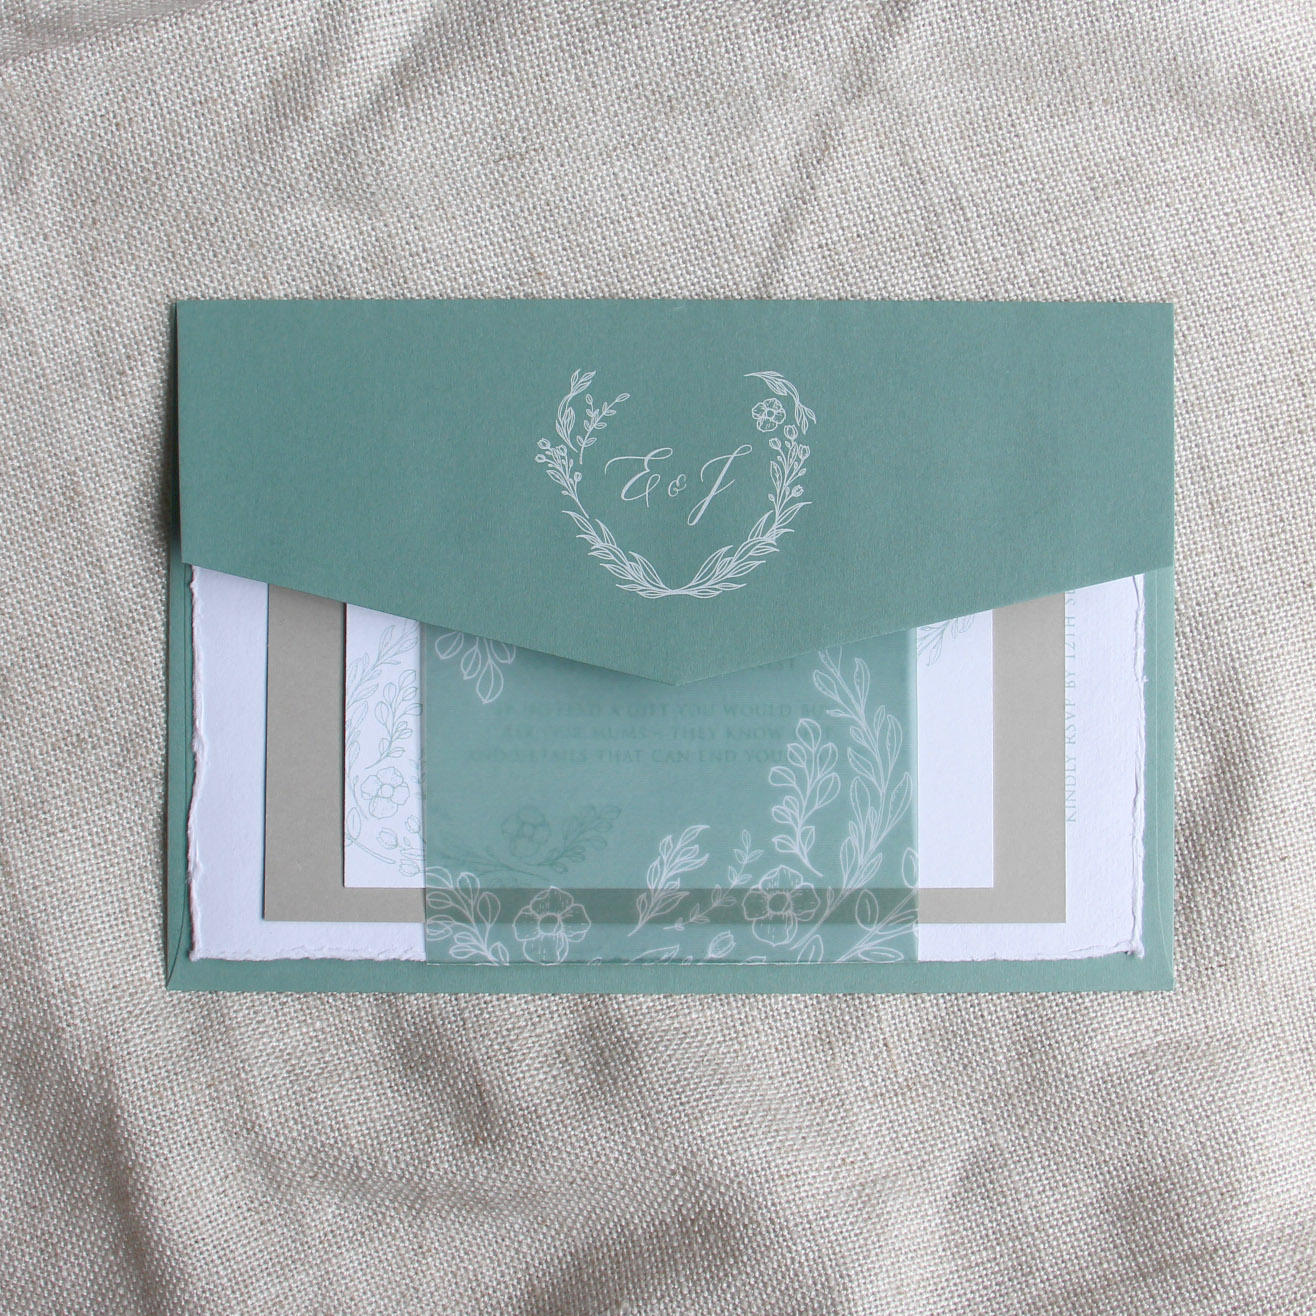 a7-envelope-templates-for-5x7-cards-invitations-response-card-etsy